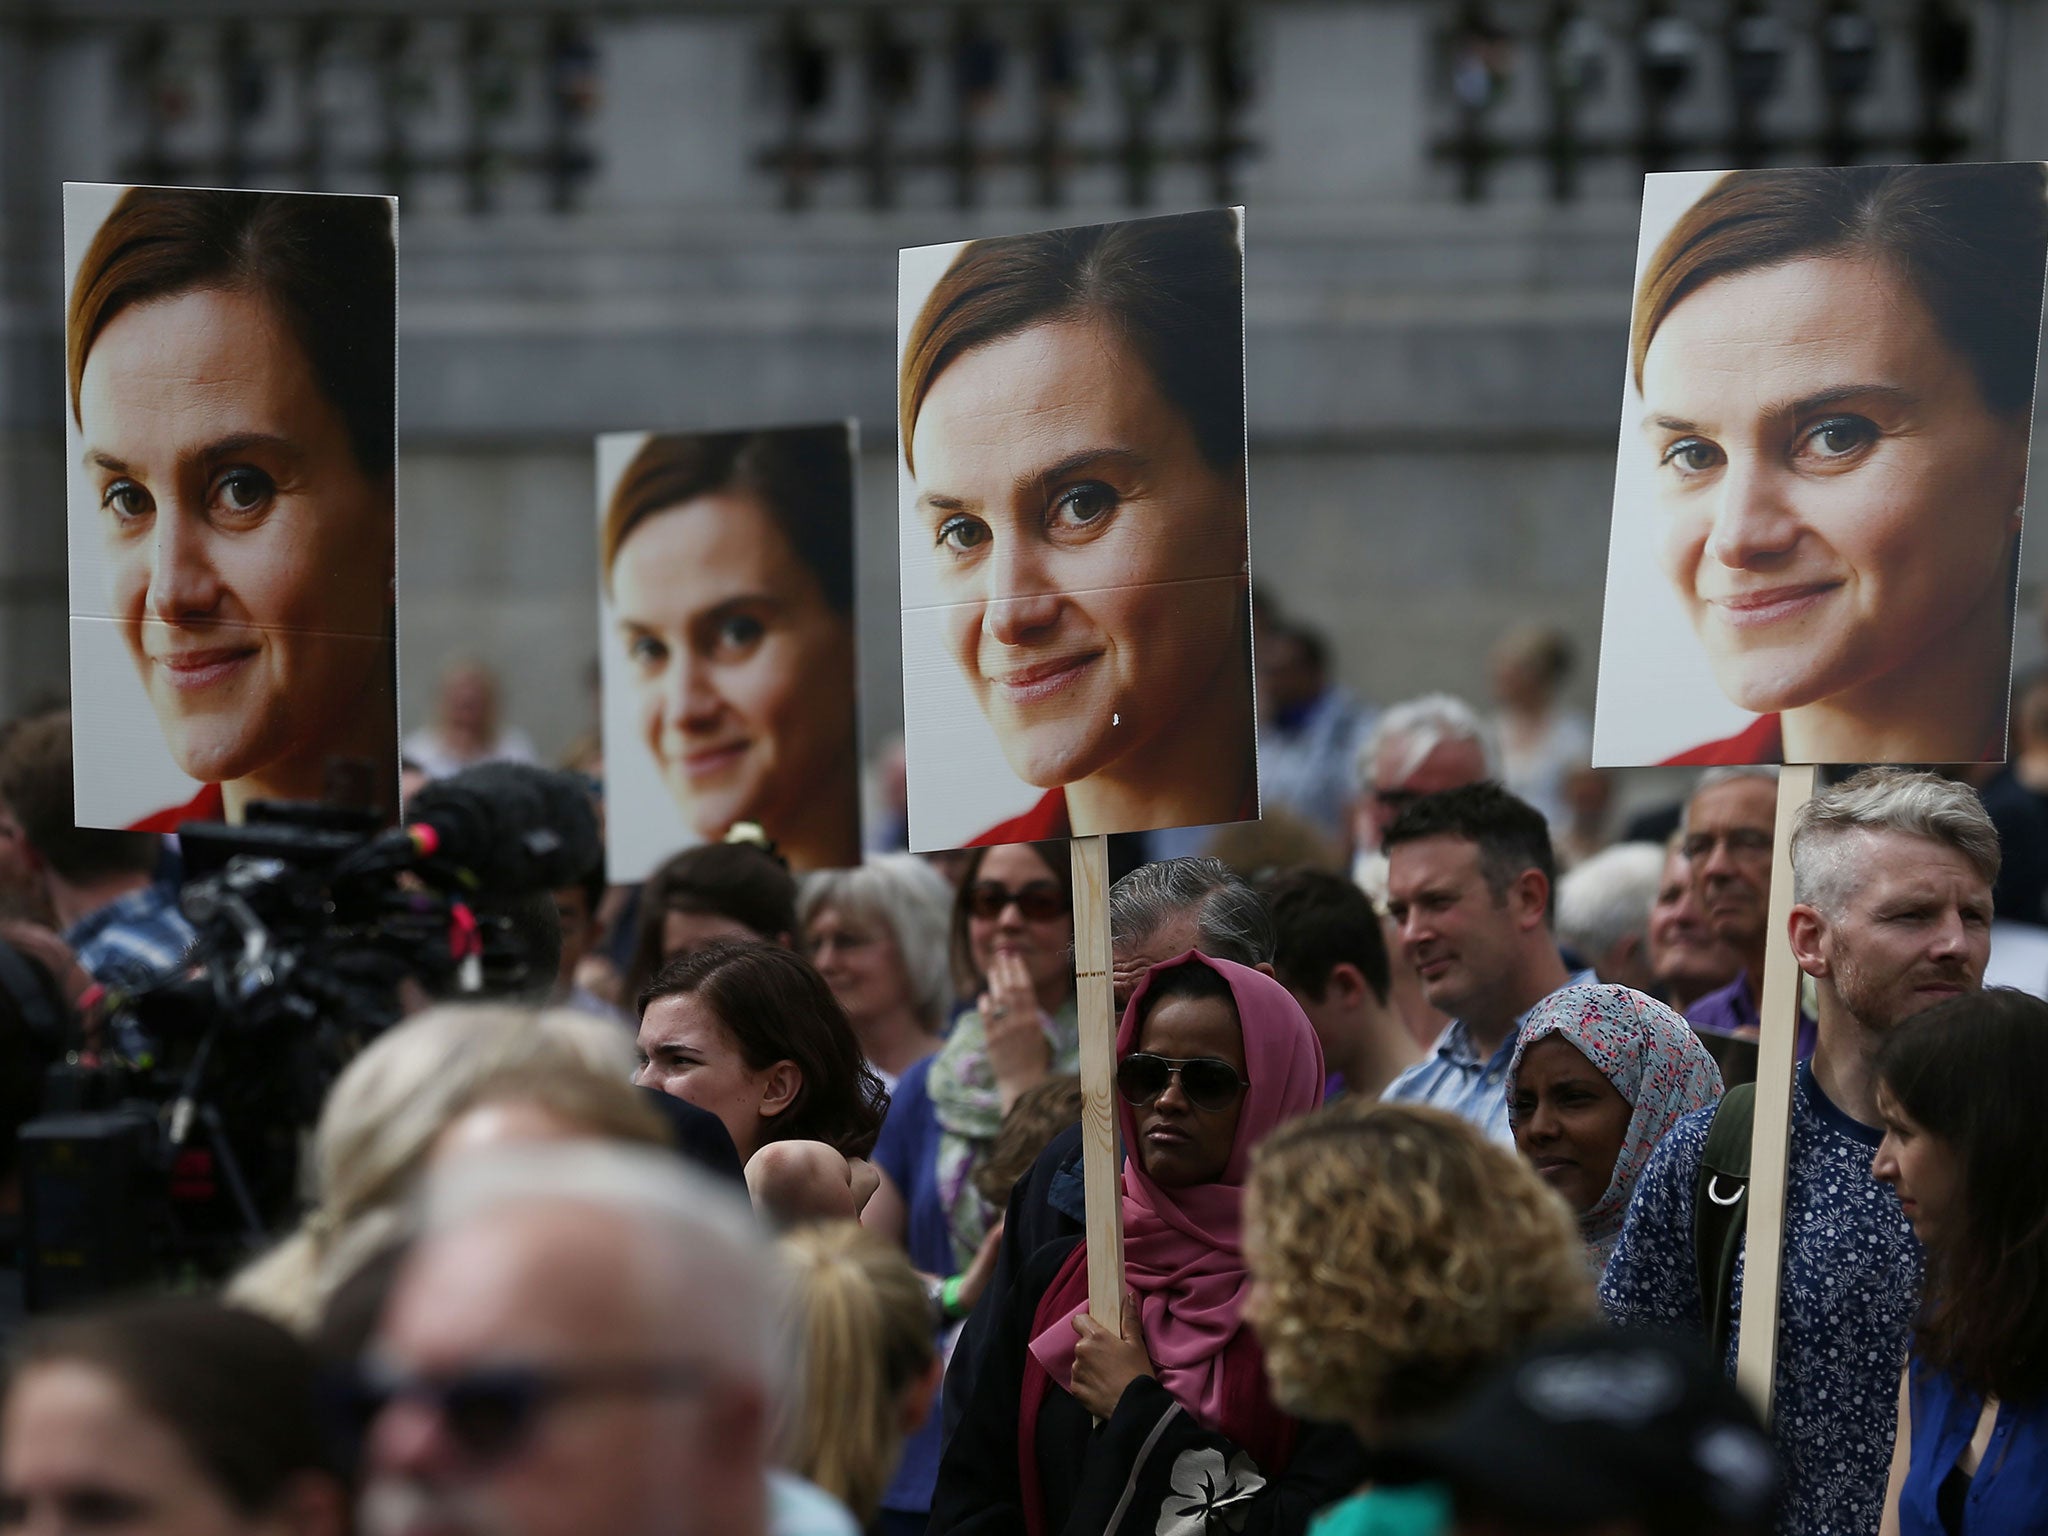 People attending a commemorative event to celebrate the life of Labour MP Jo Cox in Trafalgar Square (AFP/Getty Images)